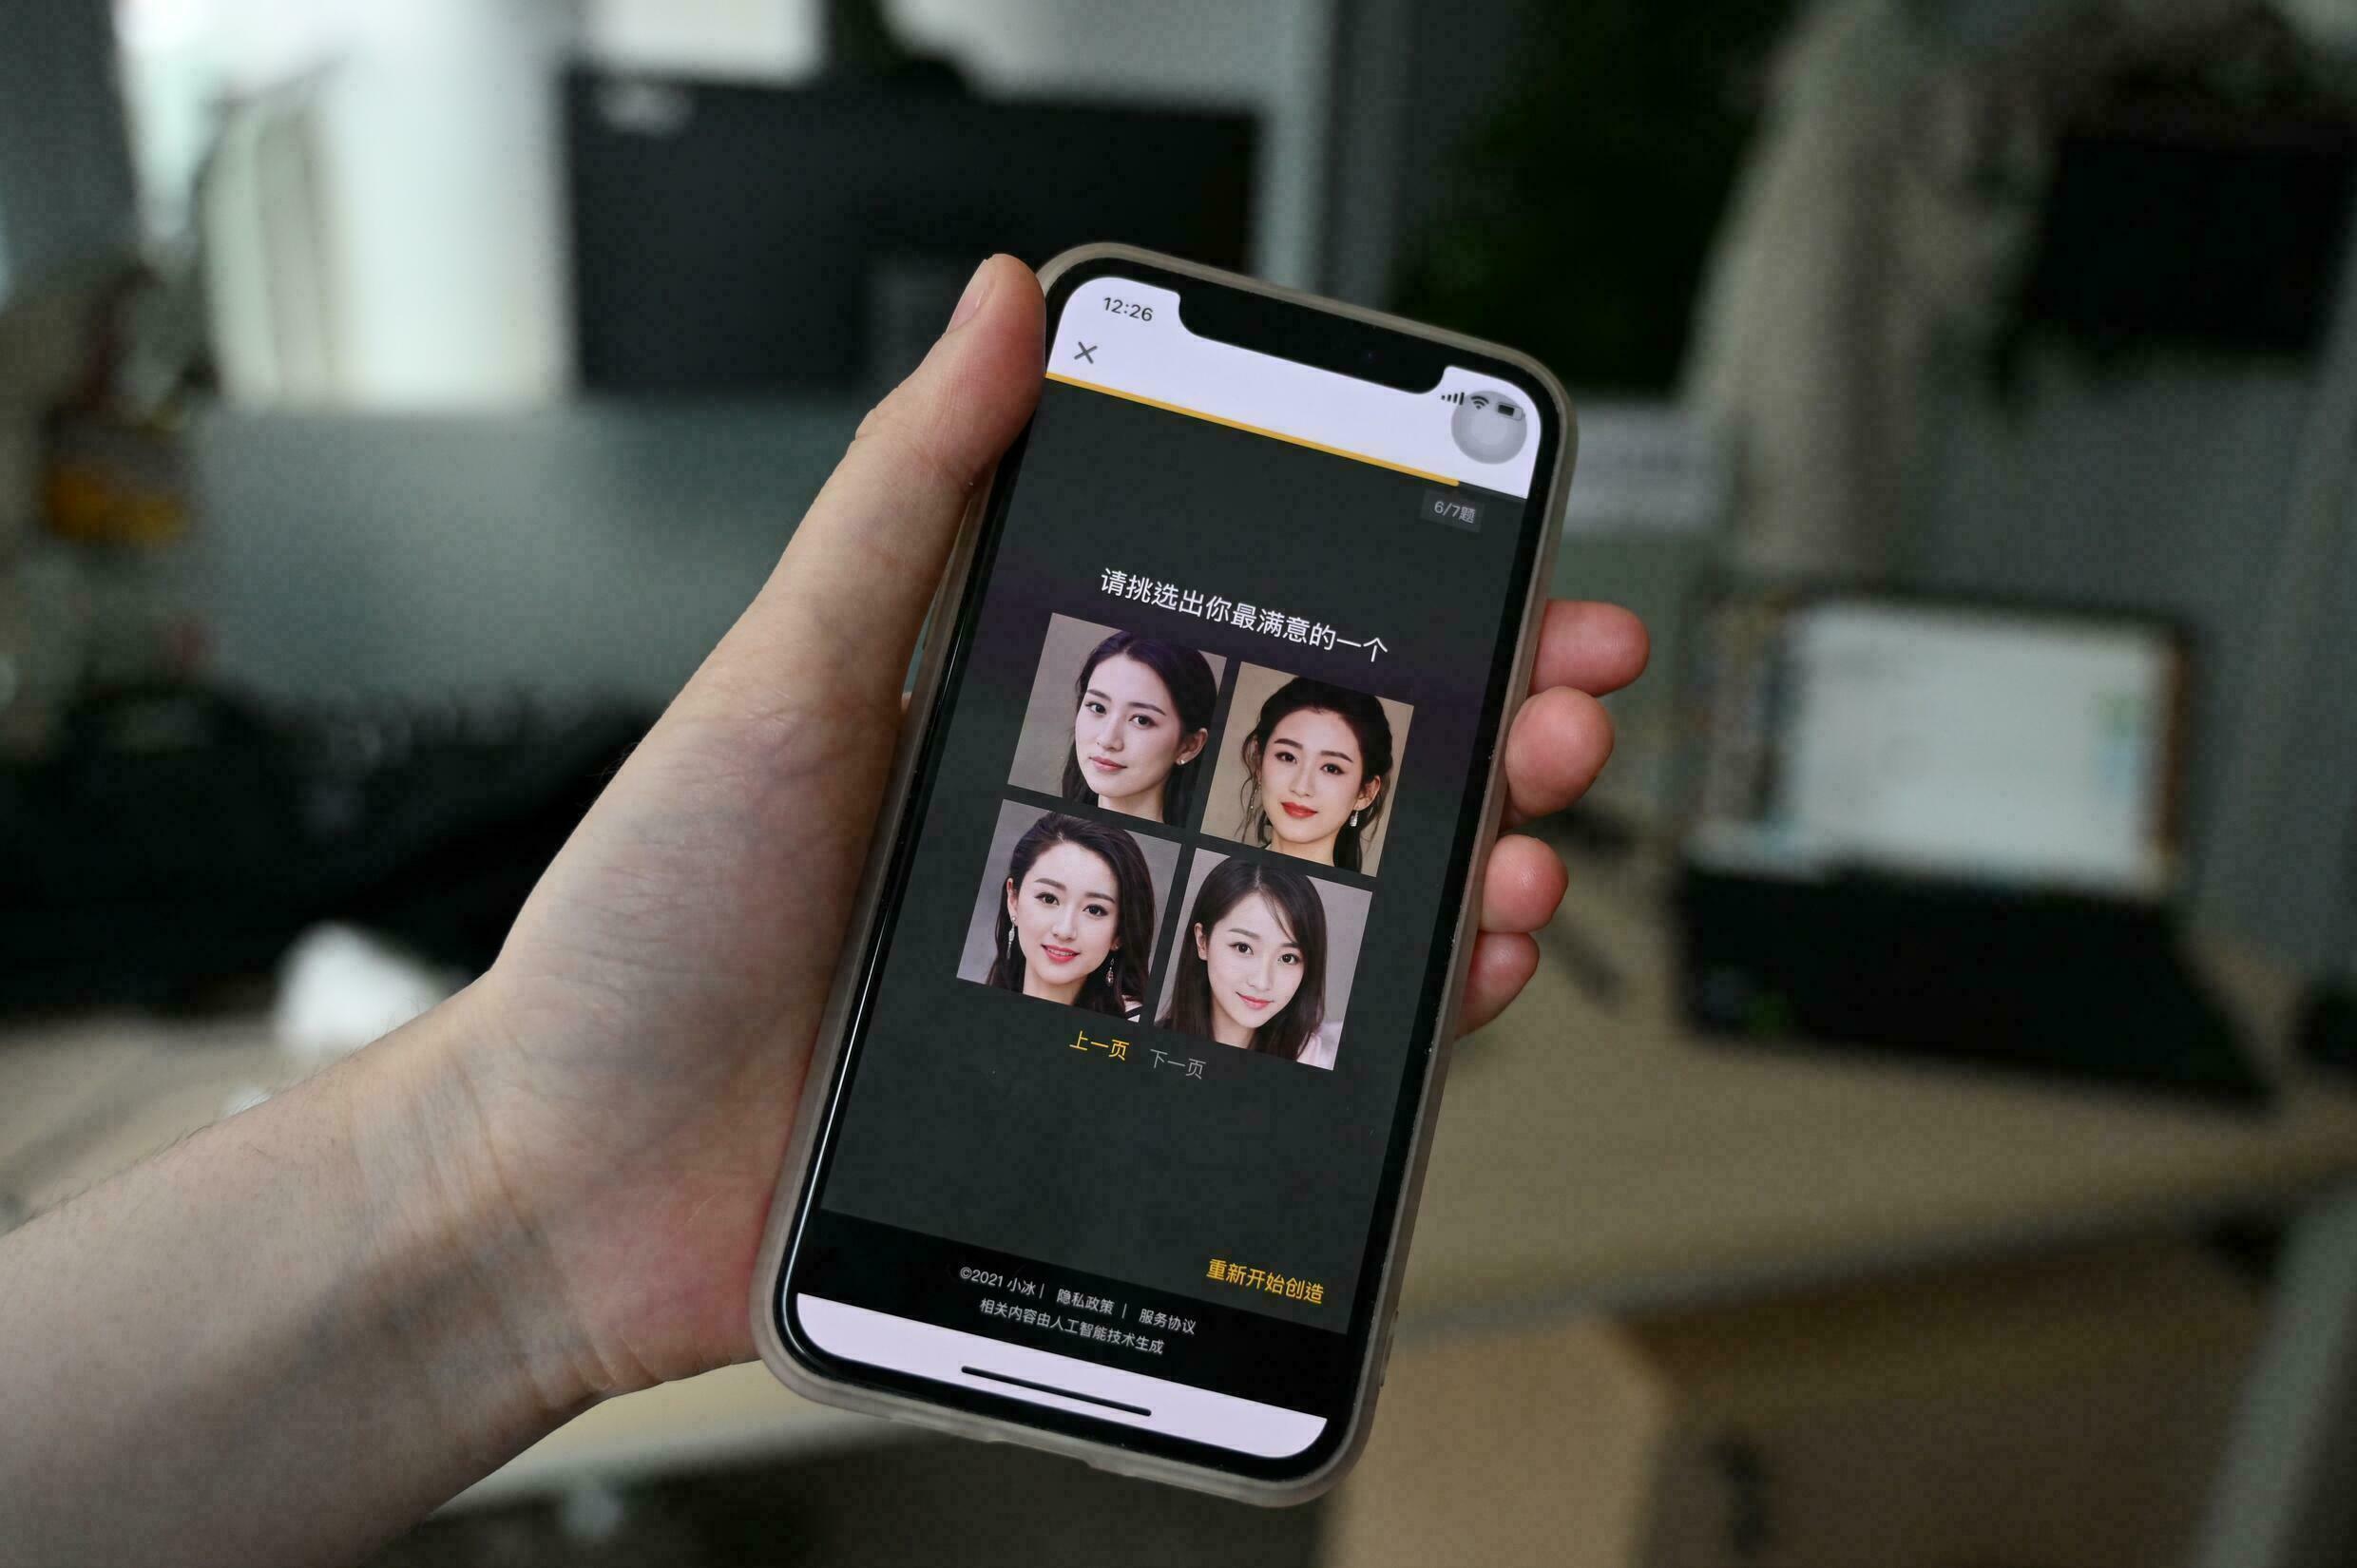 A XiaoIce employee displays photos of virtual women who can be chosen as friends on their smartphones on July 5, 2021 in Beijing